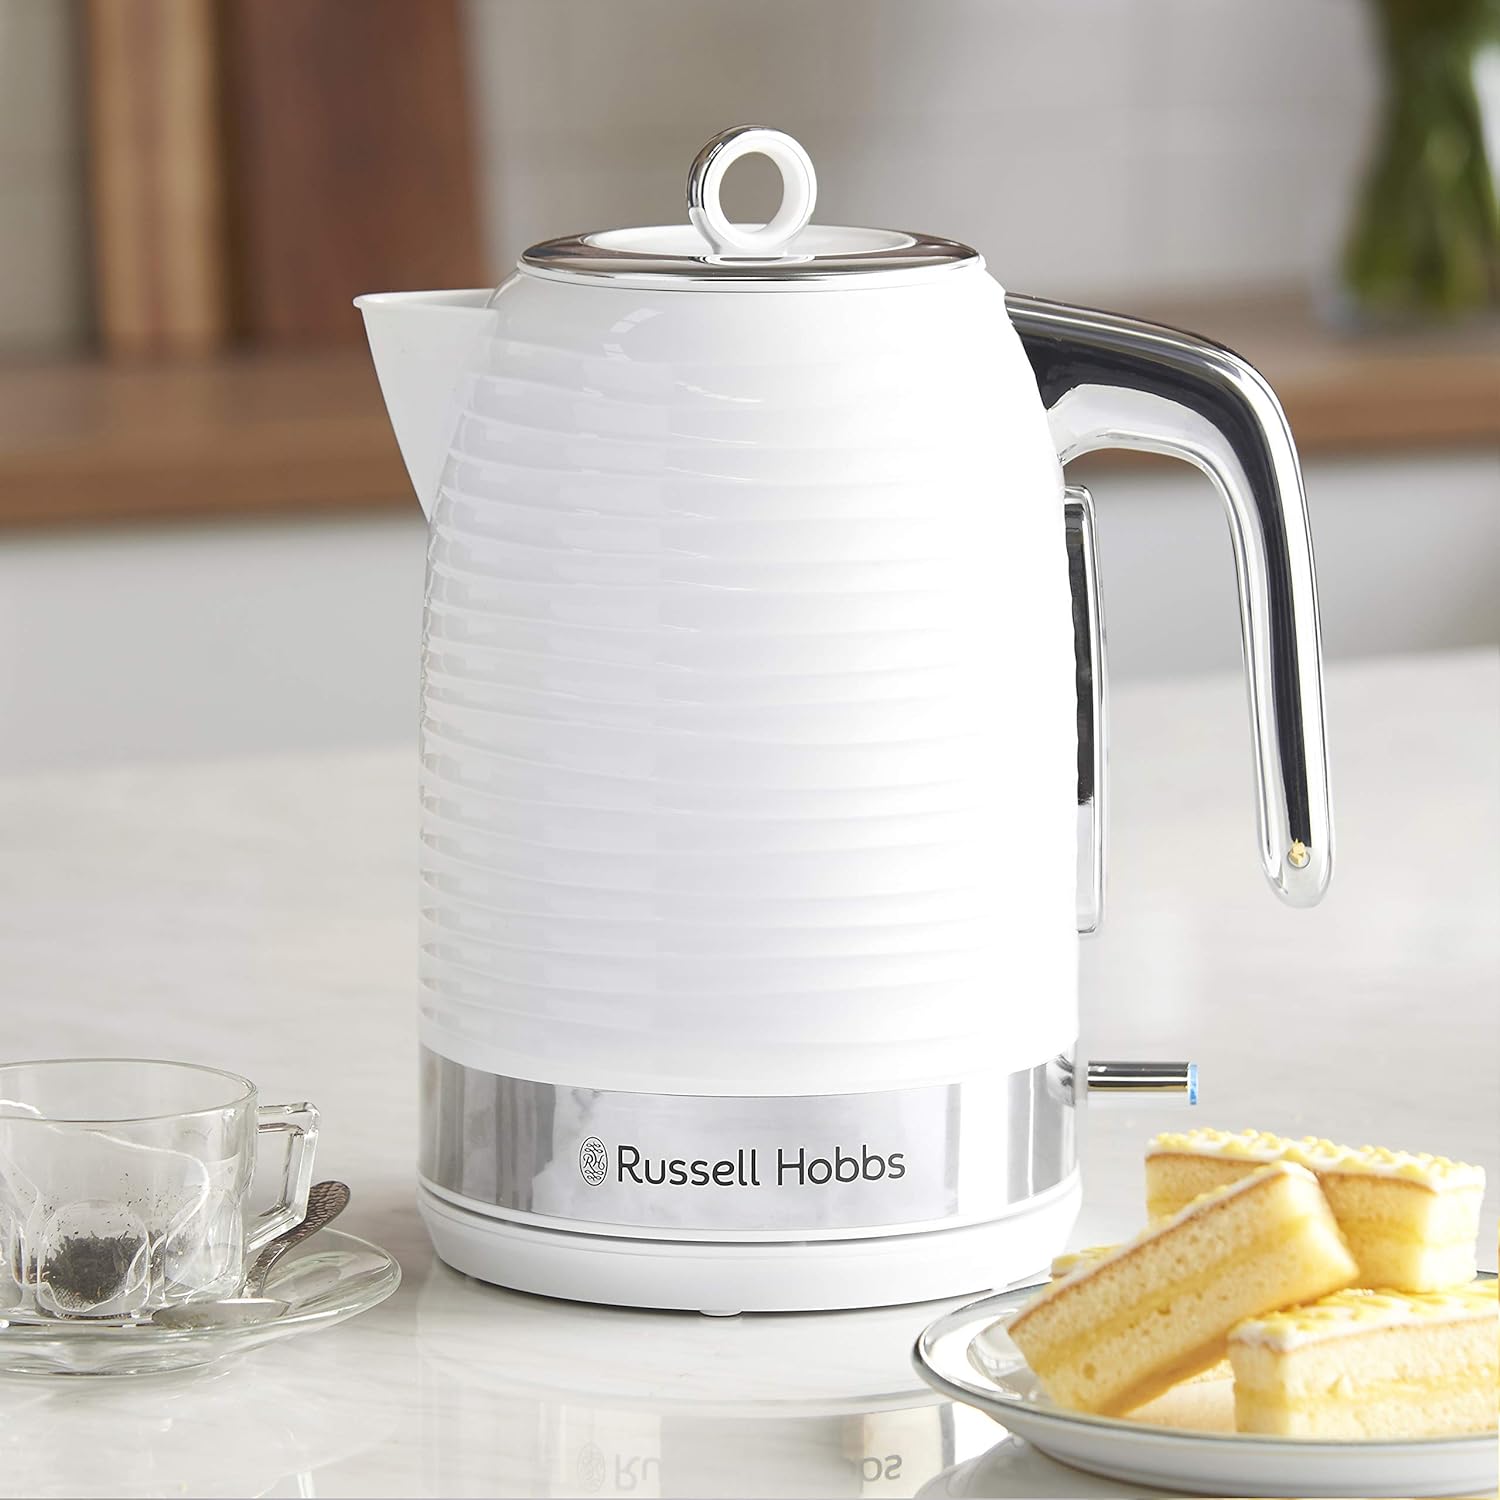 Russell Hobbs Inspire Electric 1.7L Cordless Kettle (Fast Boil 3KW, White premium textured plastic, high gloss finish, Removable washable anti - scale filter, Pull off lid, Perfect pour spout) 24360 - Amazing Gadgets Outlet